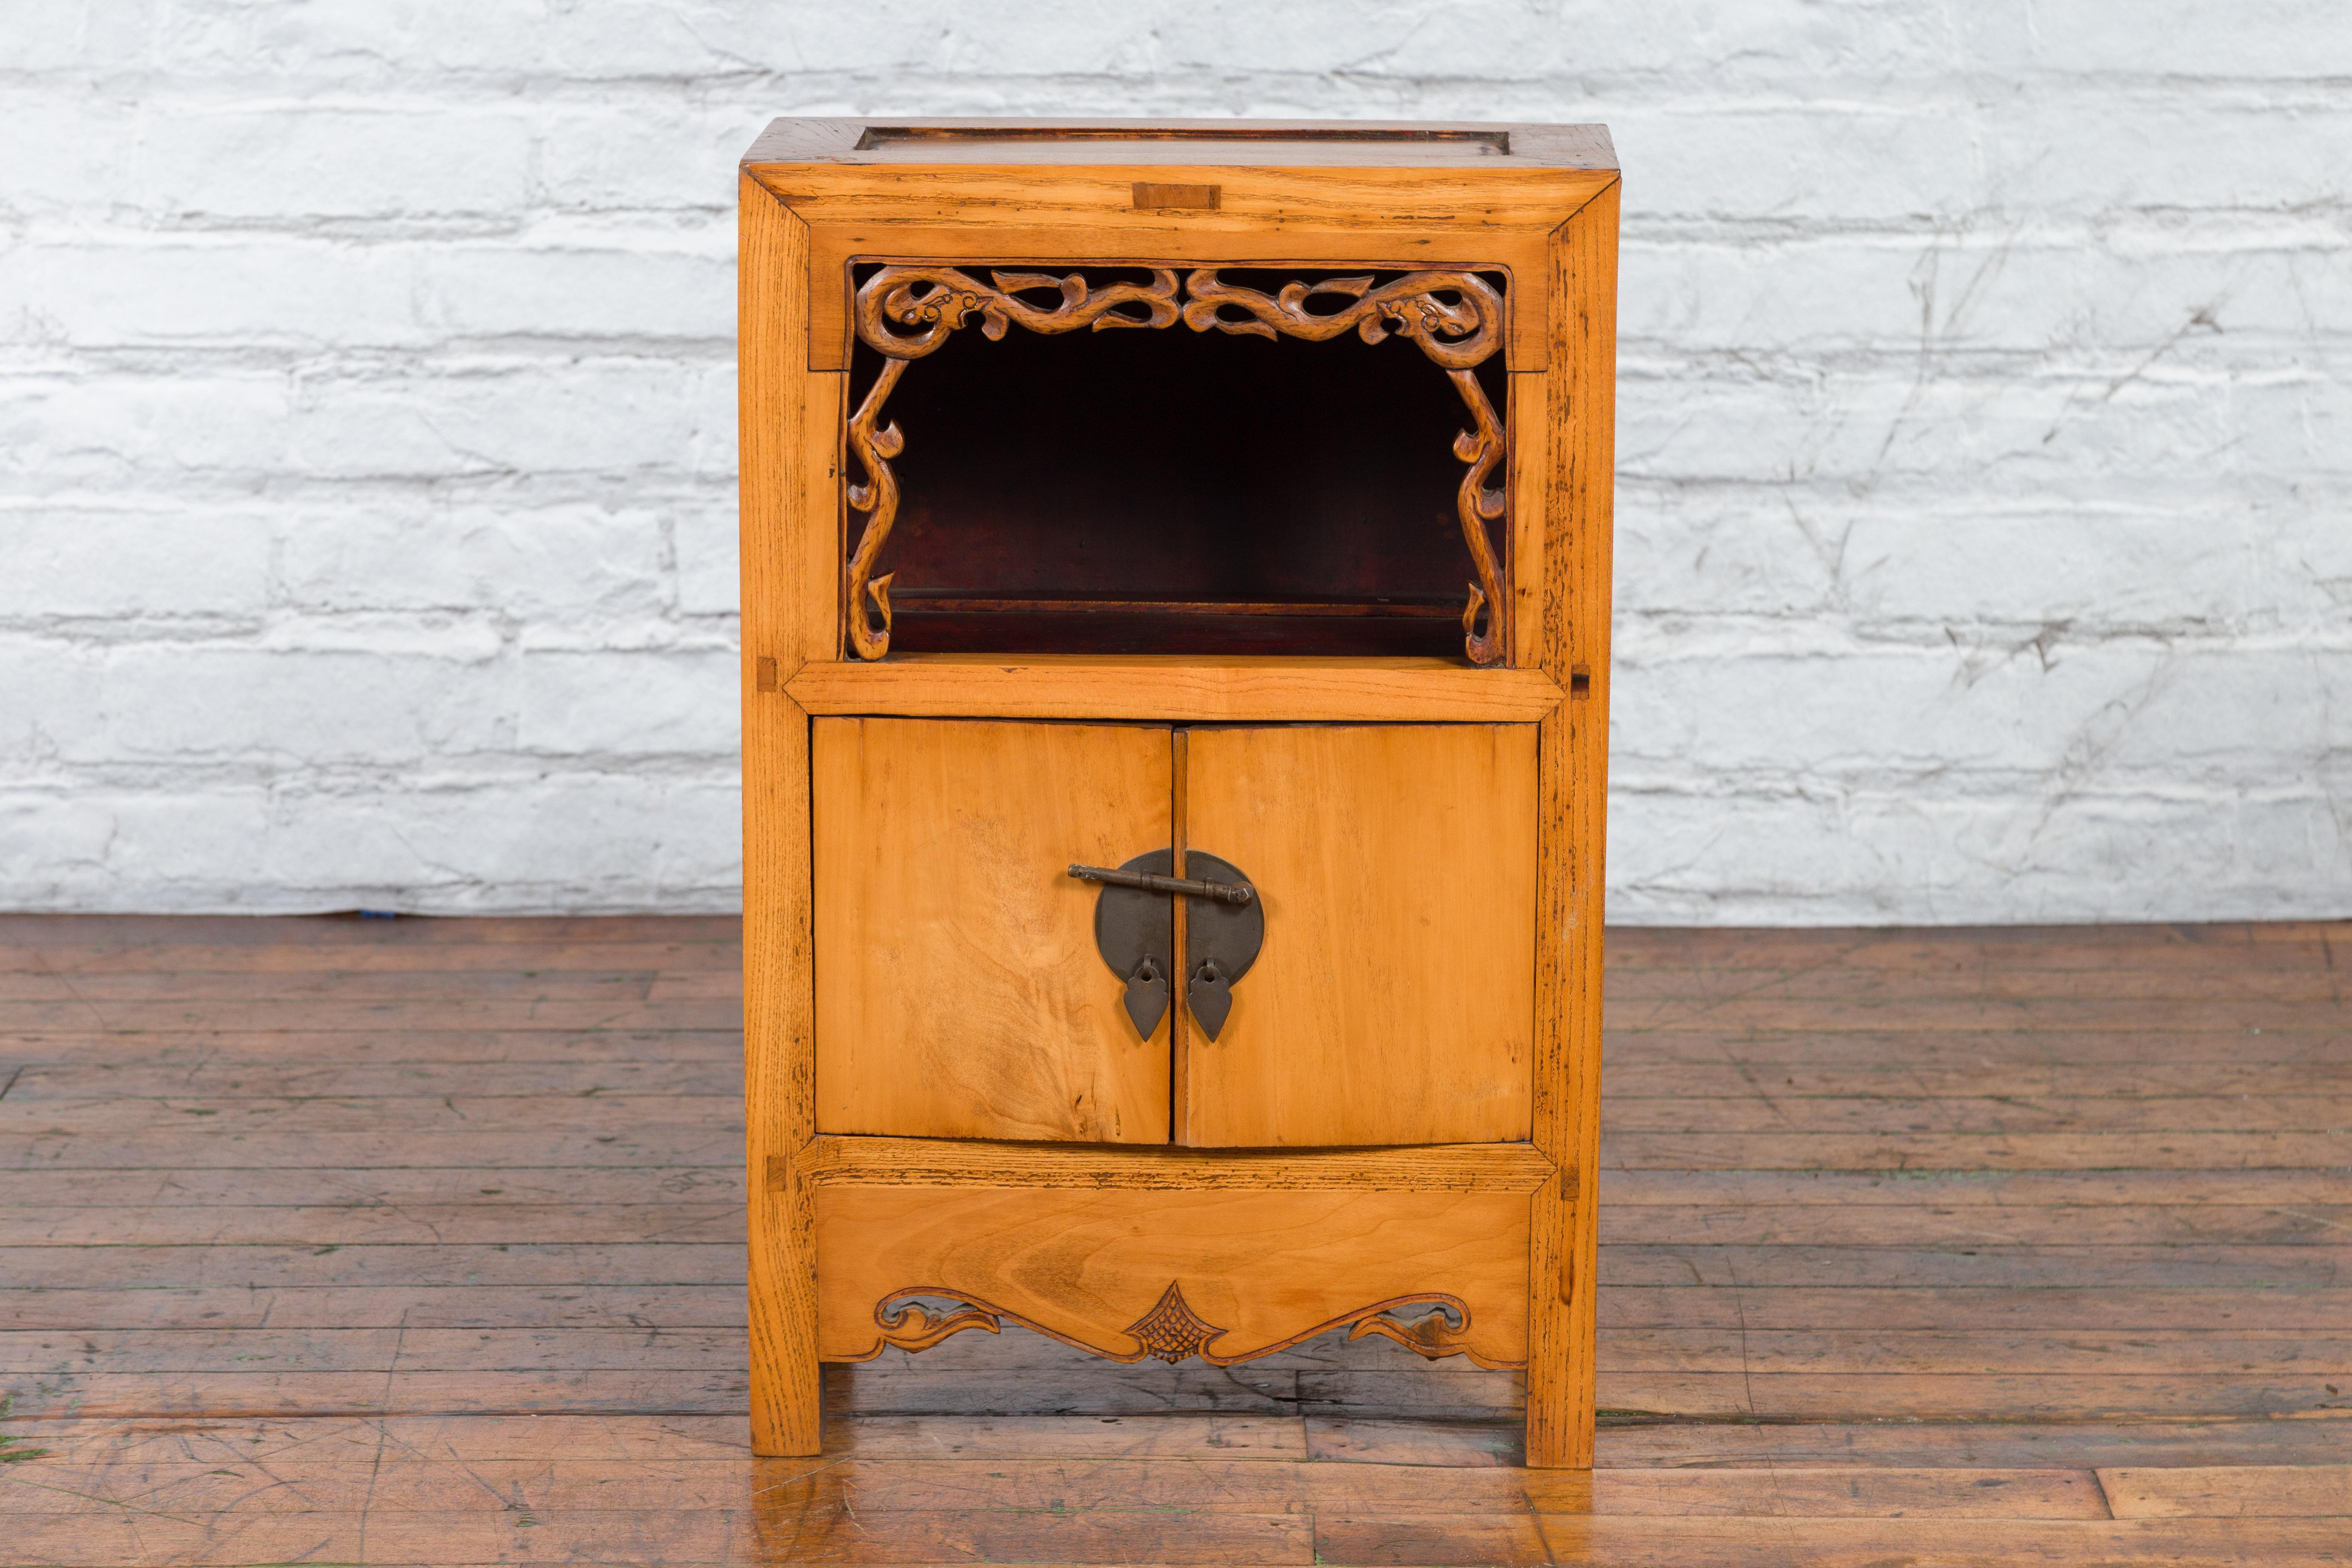 A Chinese Qing Dynasty period small cabinet from the 19th century, with carved motifs, open shelf and two doors. Created in China during the 19th century, this small cabinet features a rectangular top with recessed board, sitting above an open shelf